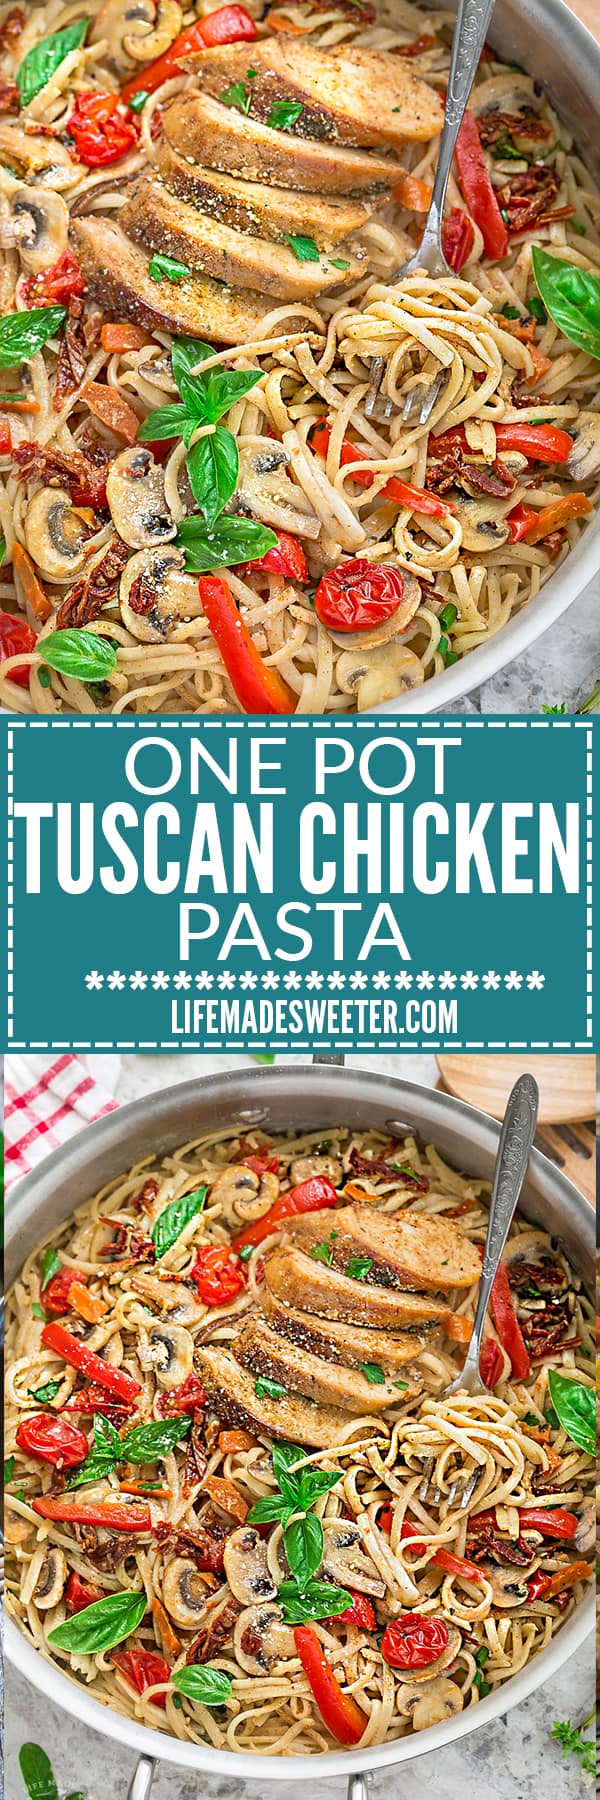 One Pot Tuscan Chicken Pasta makes the perfect easy weeknight meal!